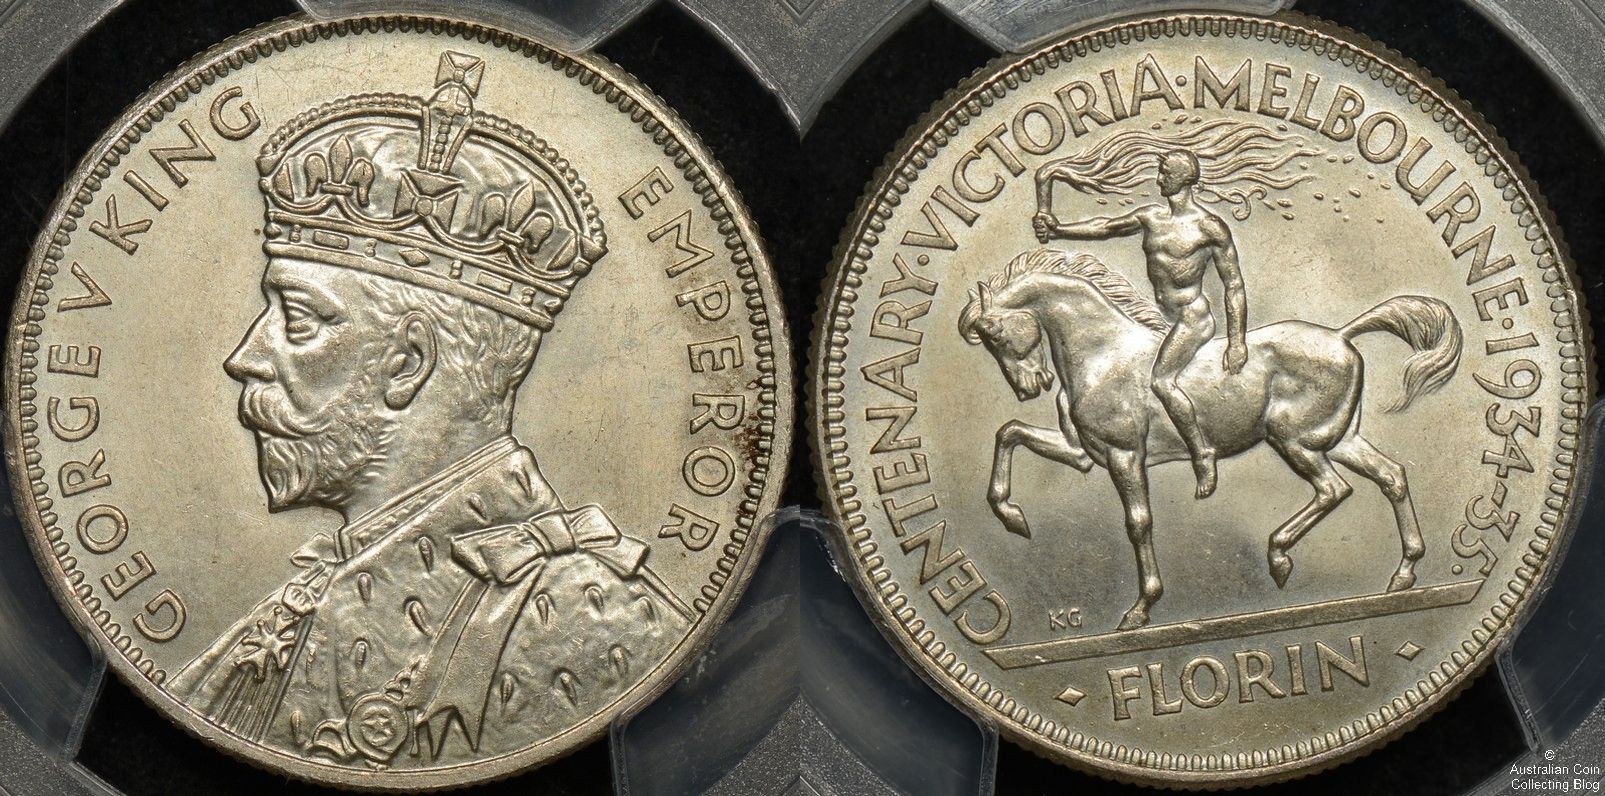 1934-35 Centennial Florin with portrait of King George V